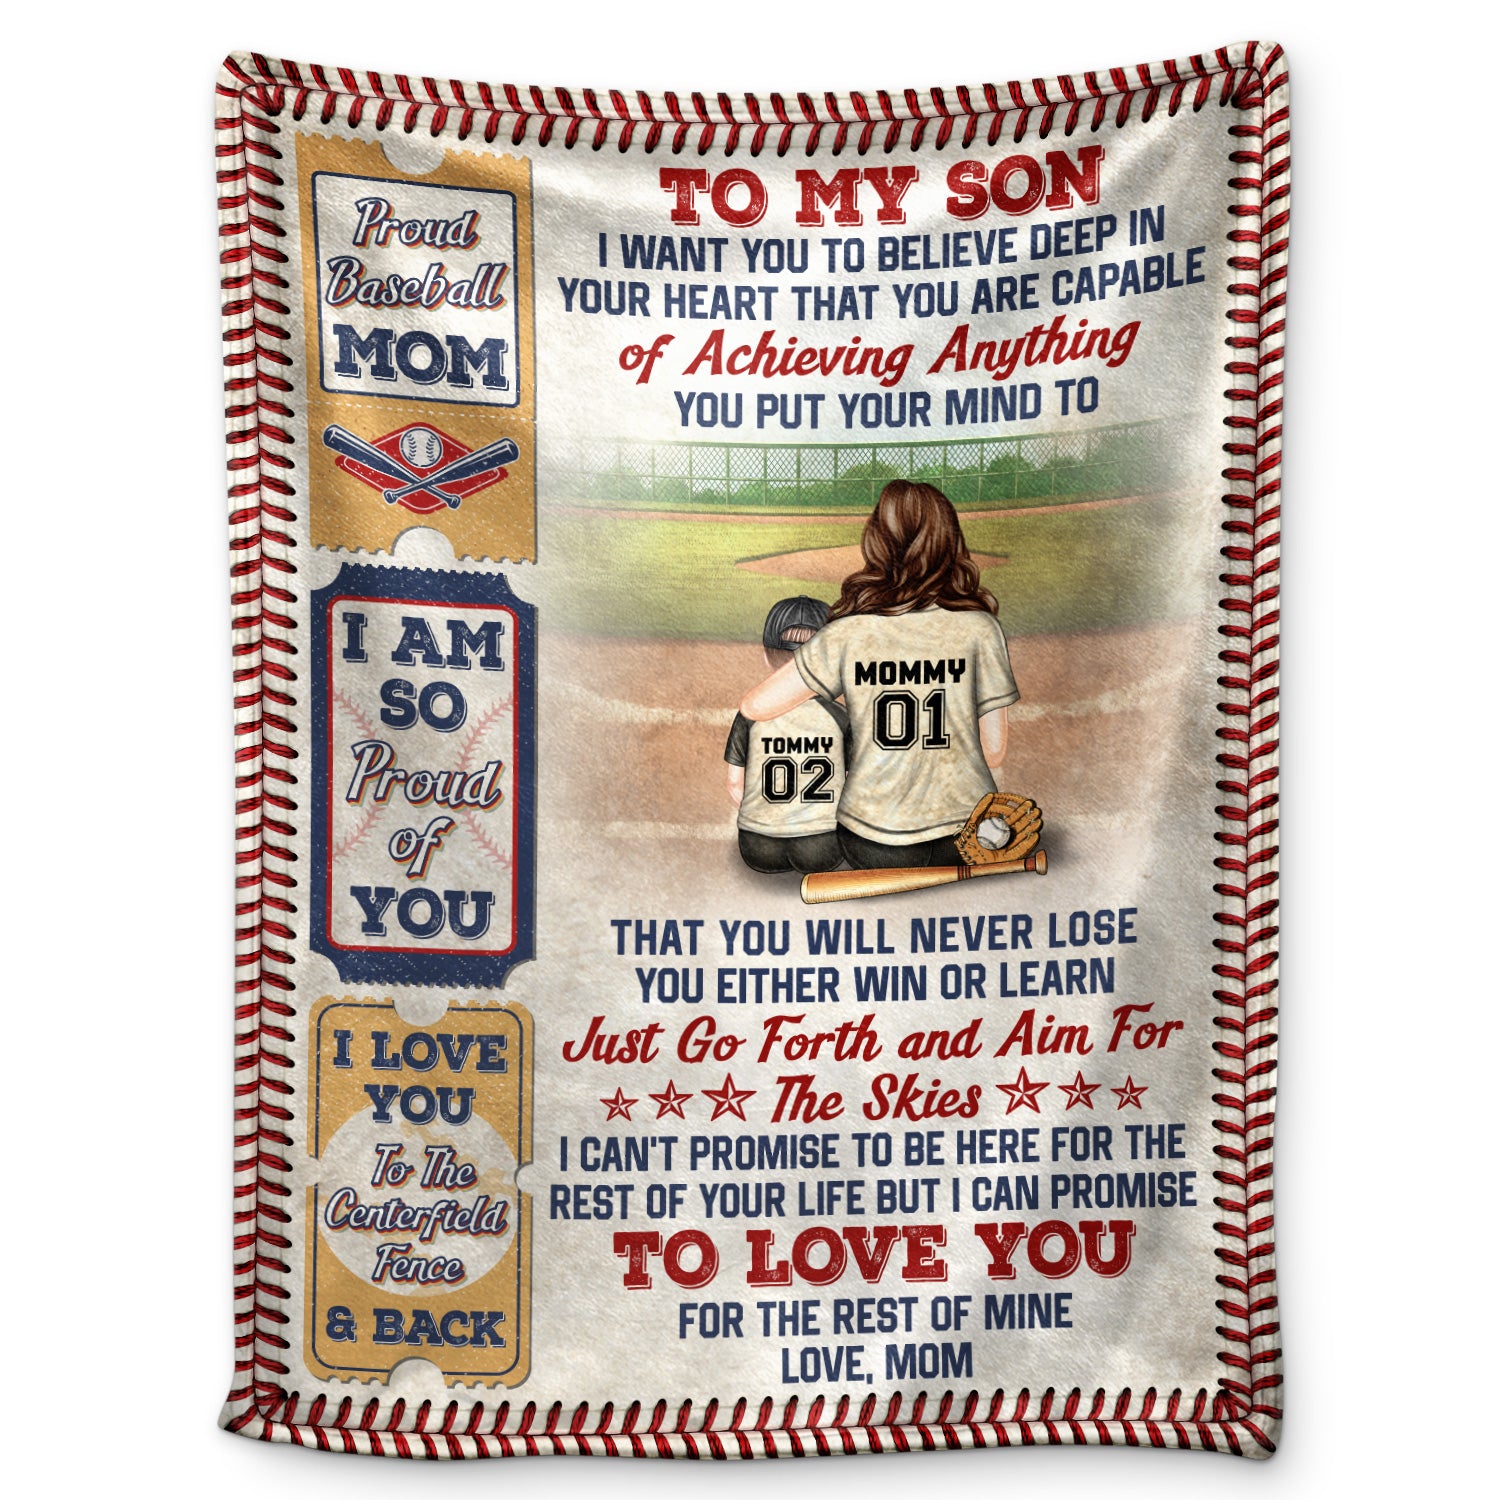 Mom To My Son I Want You To Believe Deep In - Birthday Gift For Kids, Family, Baseball Players - Personalized Custom Fleece Blanket